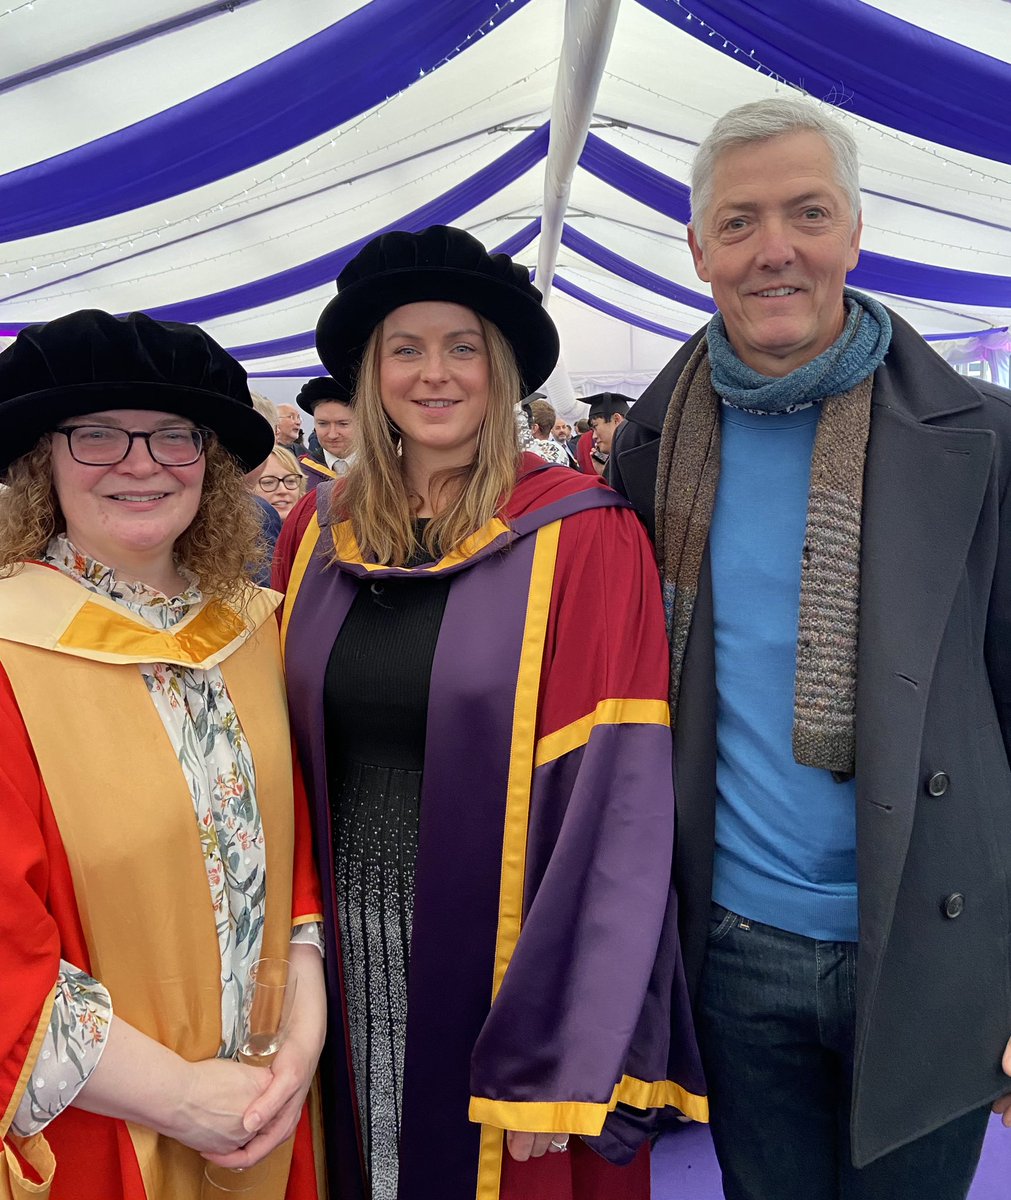 Great to celebrate @drhelenclarke’s graduation after PhD studies with @ProfEmmaCrosbie, Sacha Howell and my lab in @UoM_DCS Funded by @MCRCnews @CRUKresearch